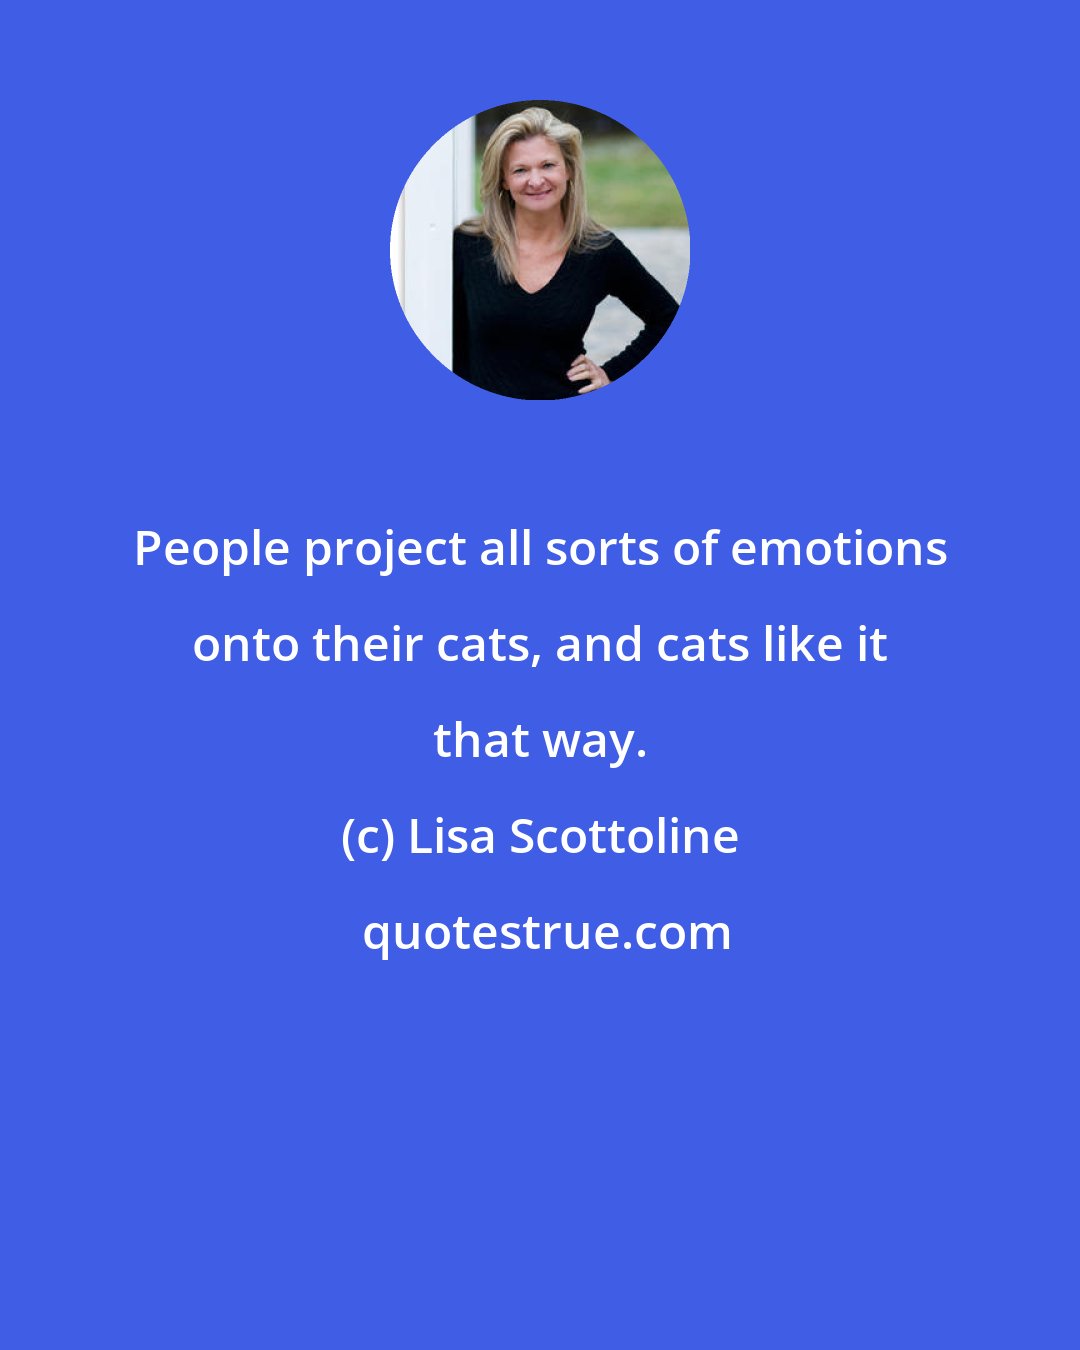 Lisa Scottoline: People project all sorts of emotions onto their cats, and cats like it that way.